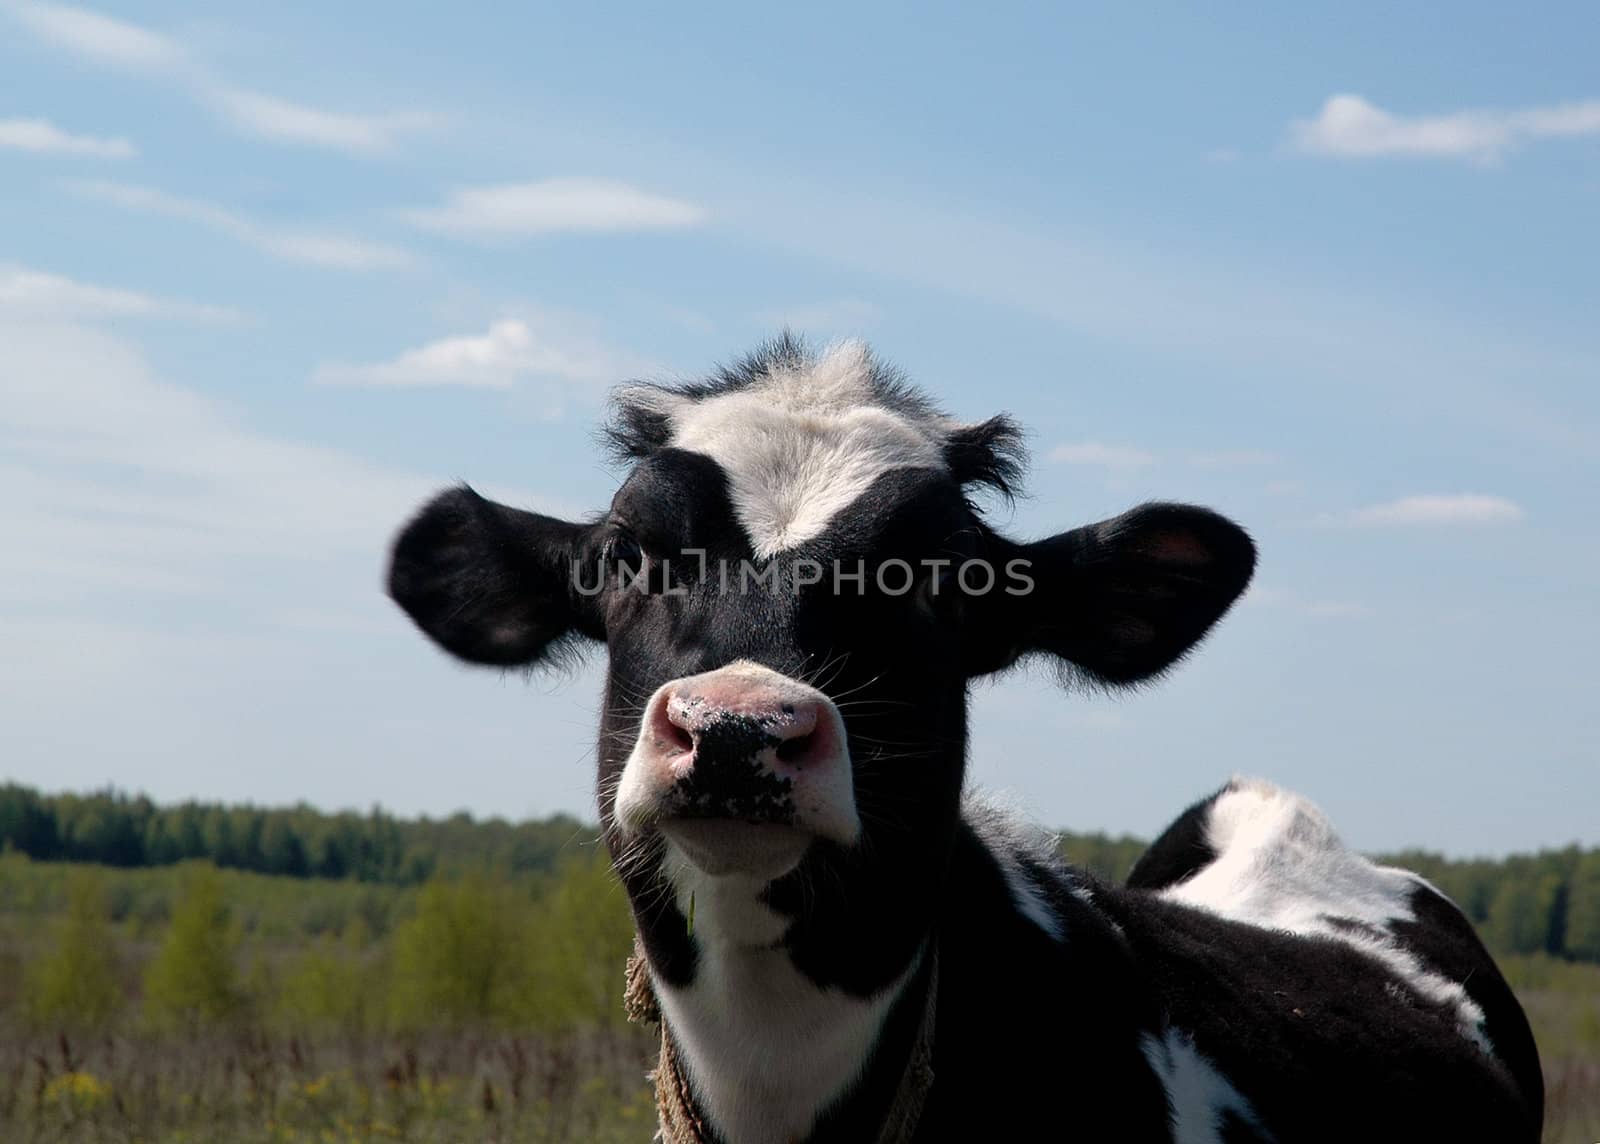 Attentive black and white cow over a blue sky background